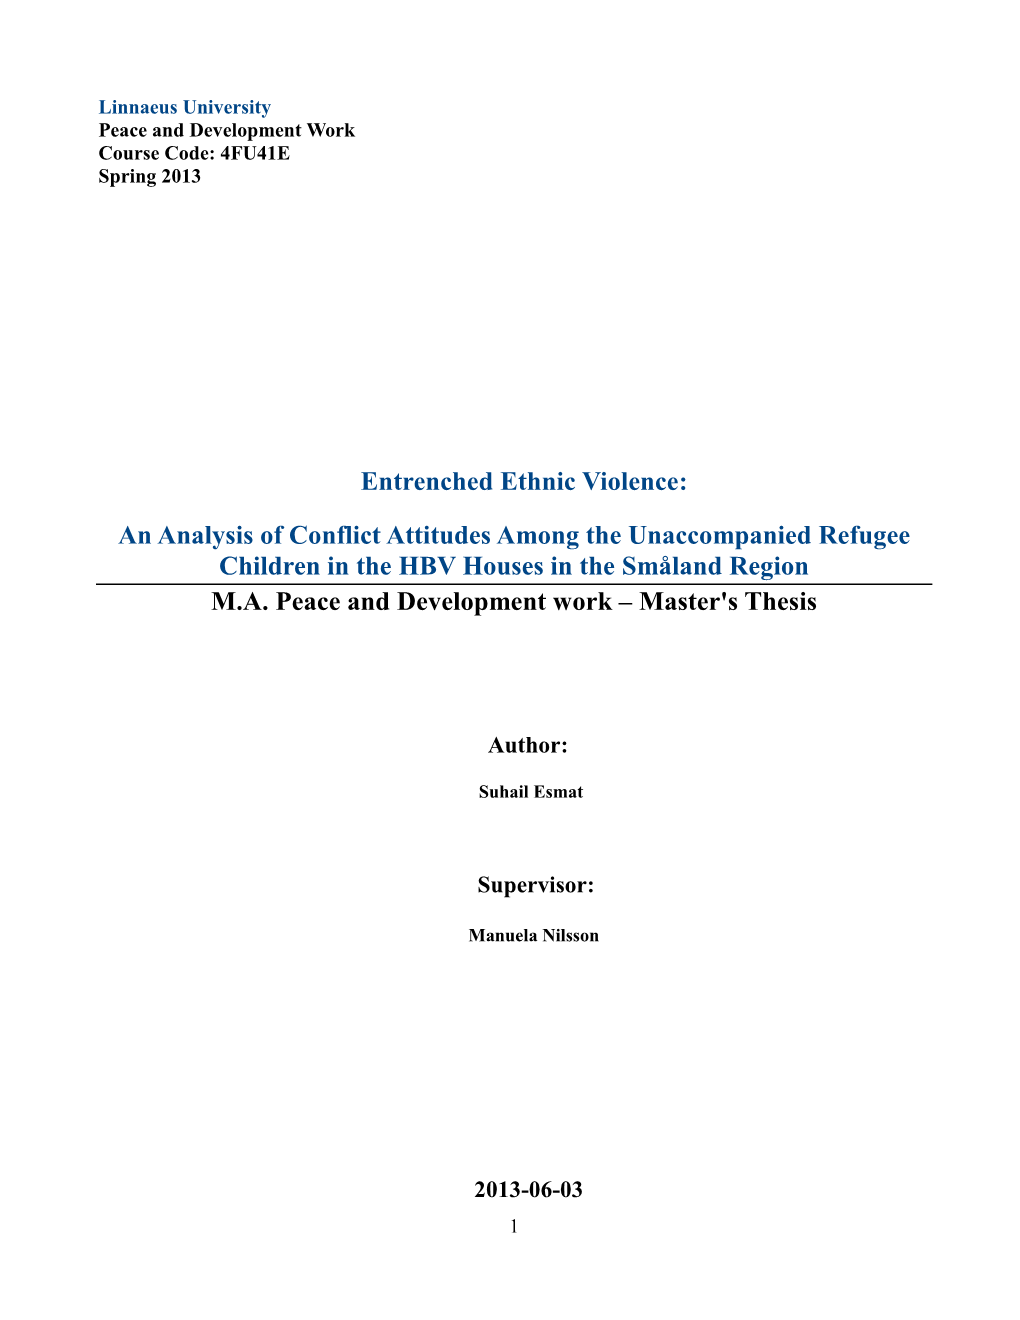 Entrenched Ethnic Violence: an Analysis of Conflict Attitudes Among